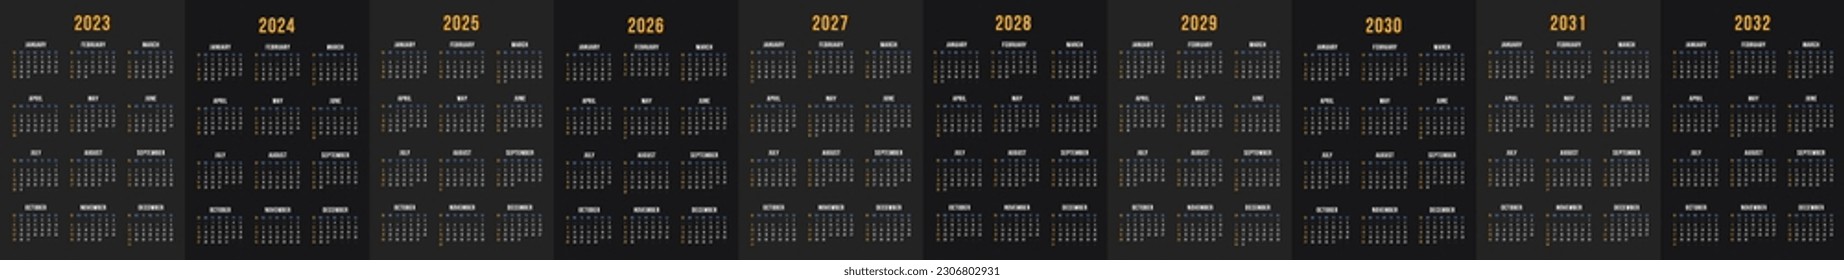 Black calendar set for 2023, 2024, 2025,2026, 2027, 2028, 2029, 2030, 2031, 2032 years. One Page Editable Vertical Vector Calendar for Night theme or mode. svg